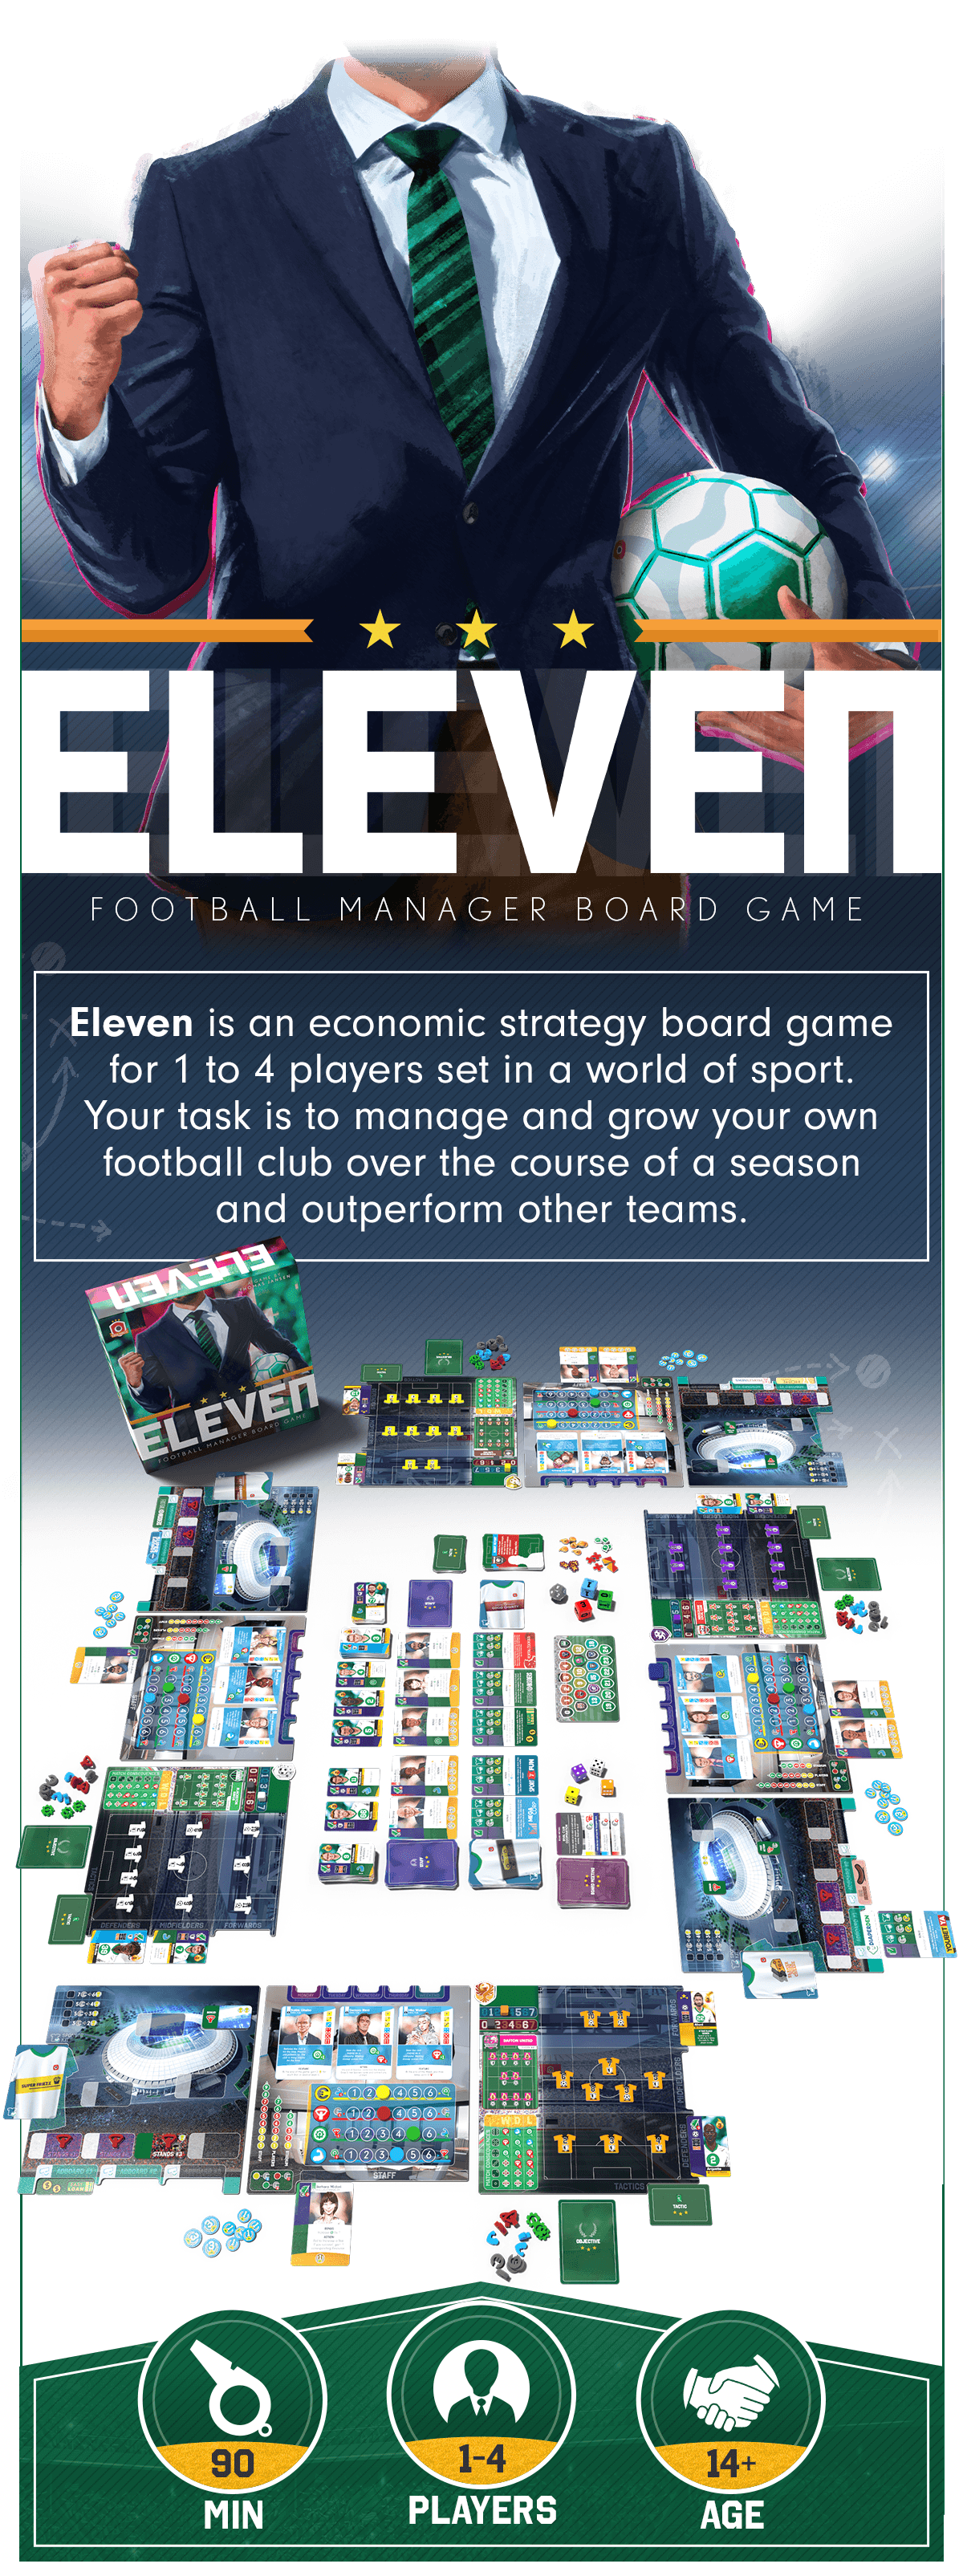 Eleven Football Manager Board Game by Portal Games